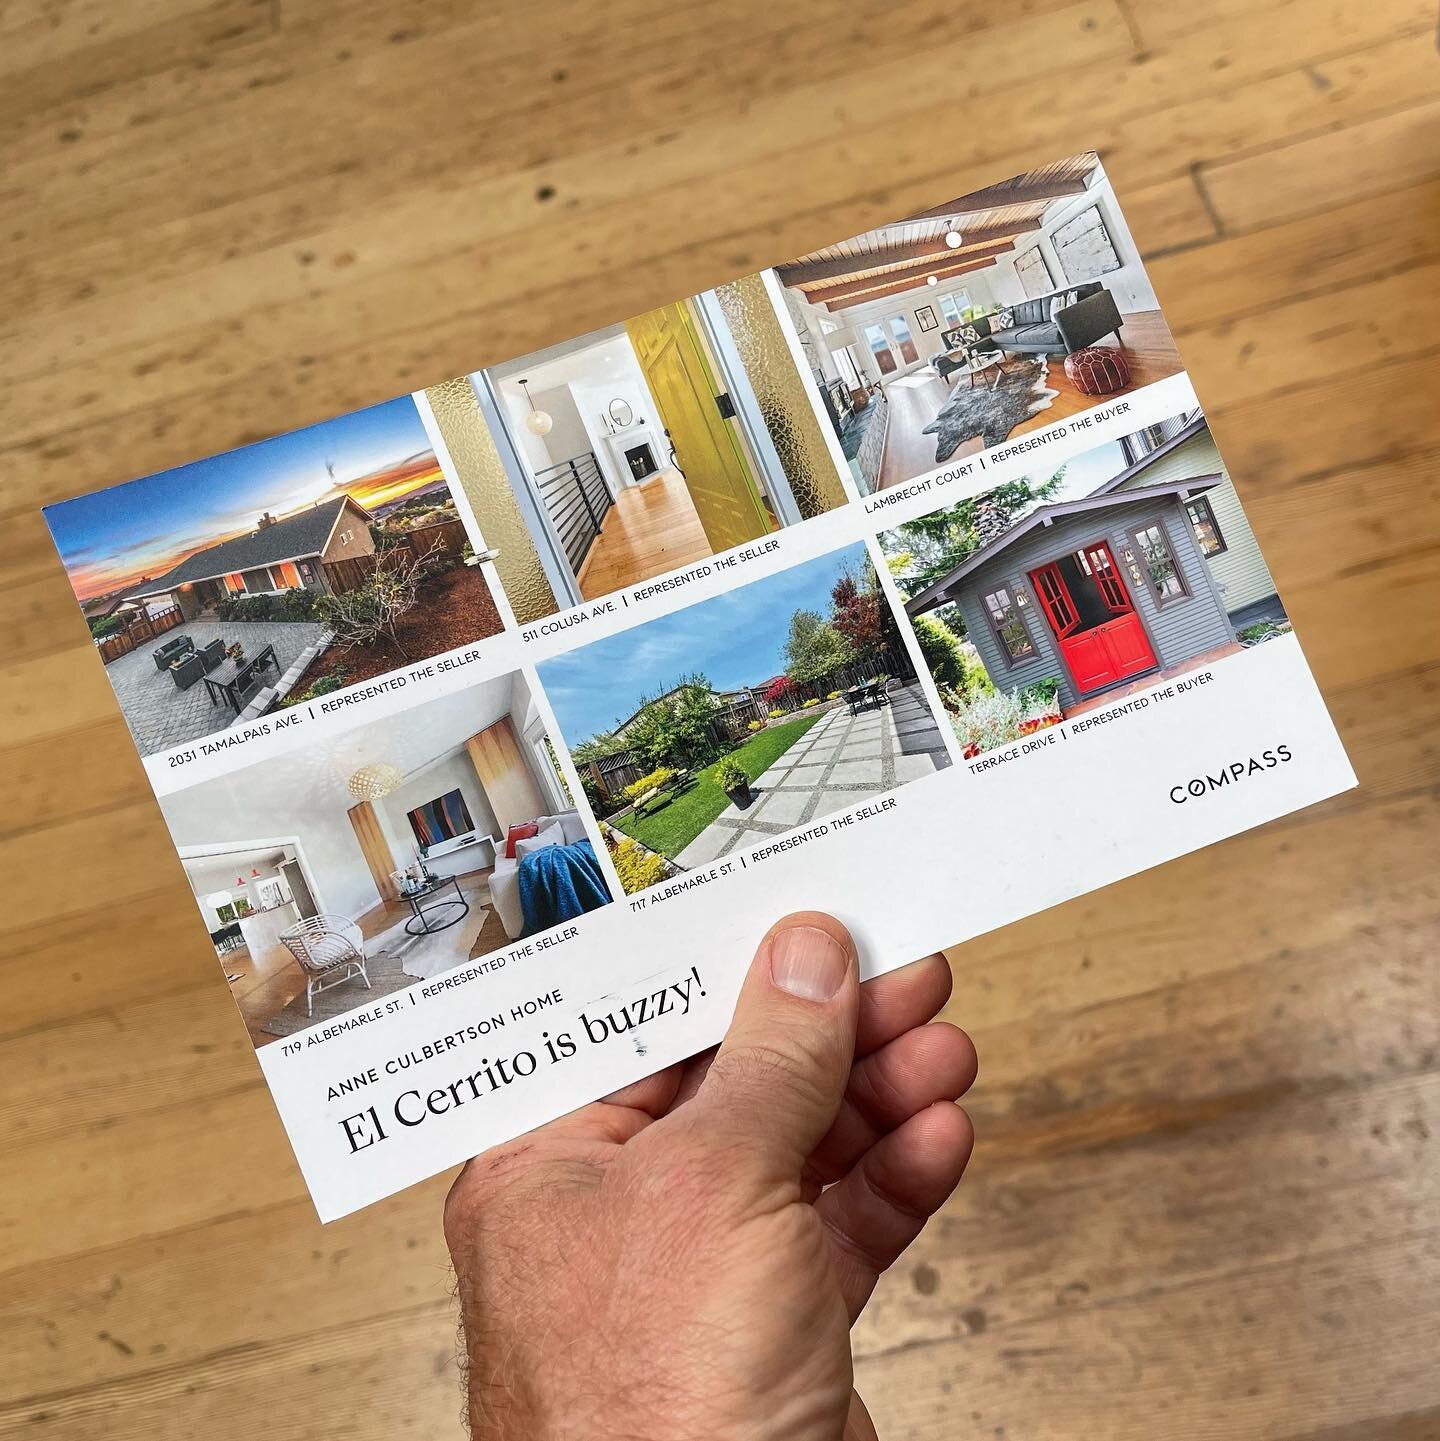 A client let me know he received my post card today, and shared a snap of it along with his note: 
&ldquo;Another super promo! Keep up the great work. Your clients are lucky, us included!&rdquo;

#mybeautifulclients 
#realestatestories
#compasseastba